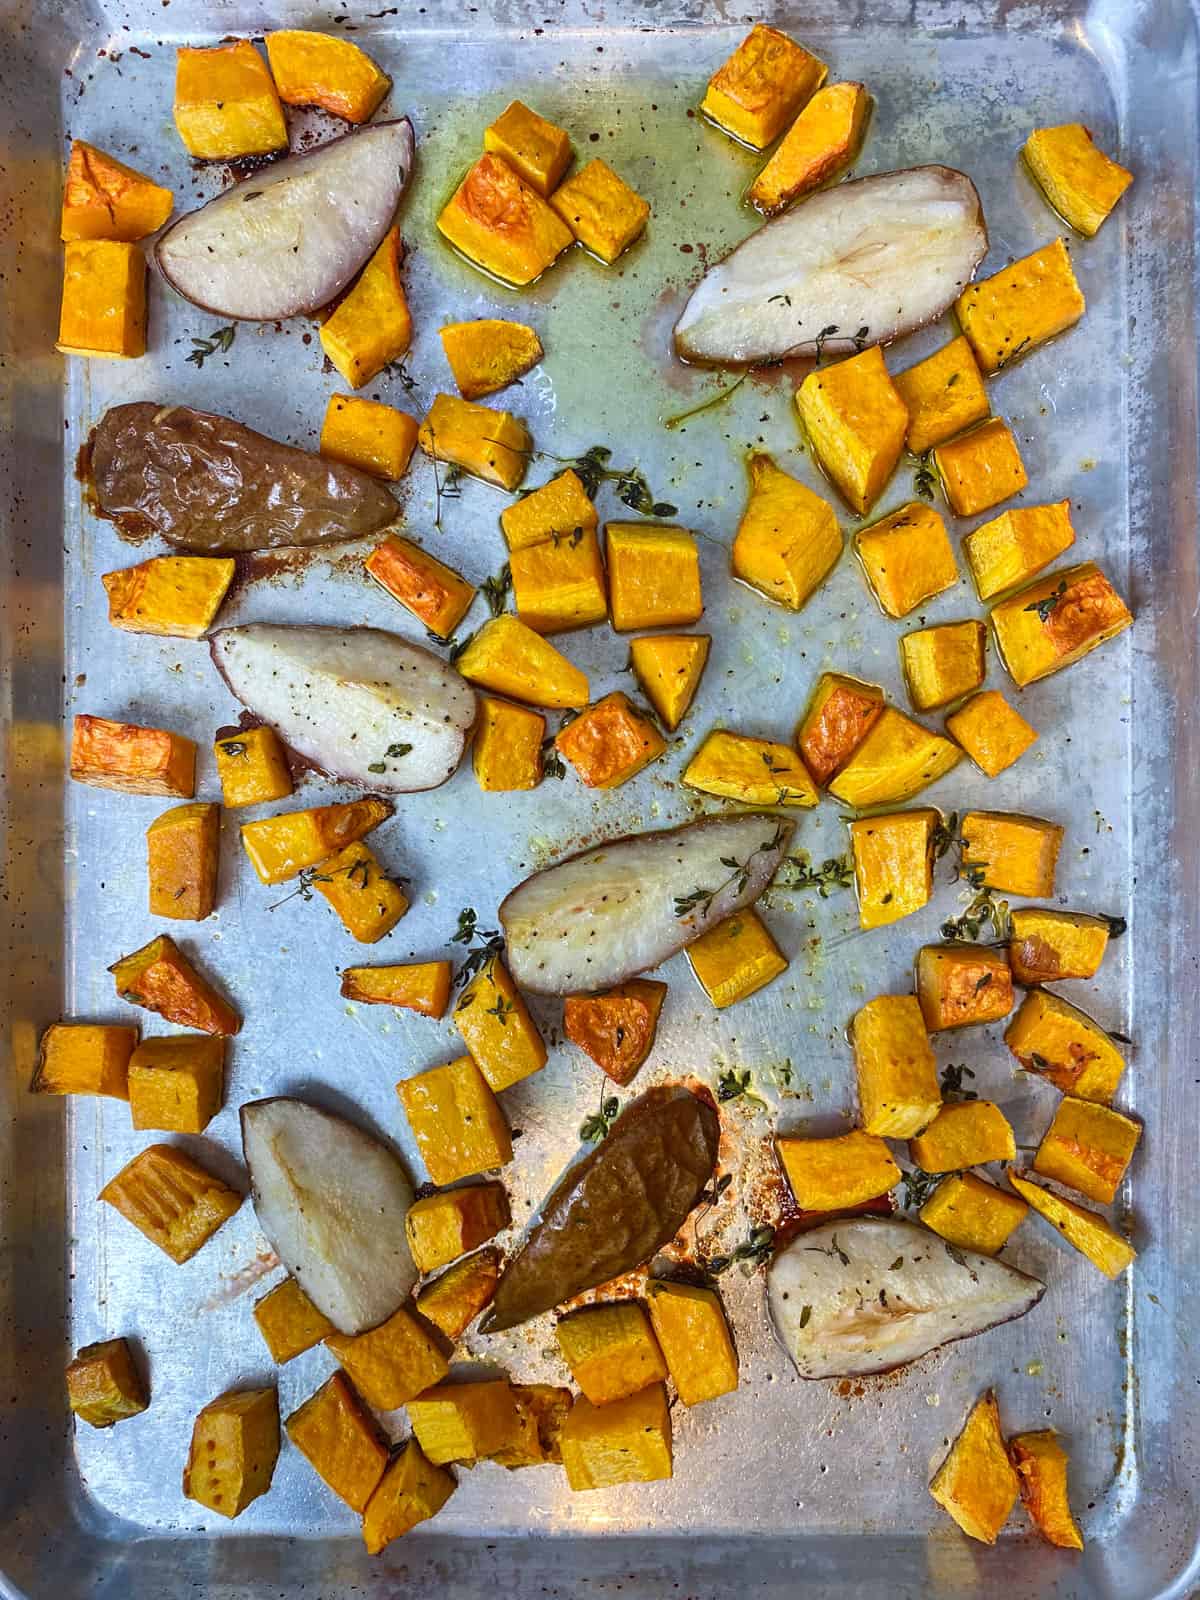 Roast the butternut squash and pears until fork tender.